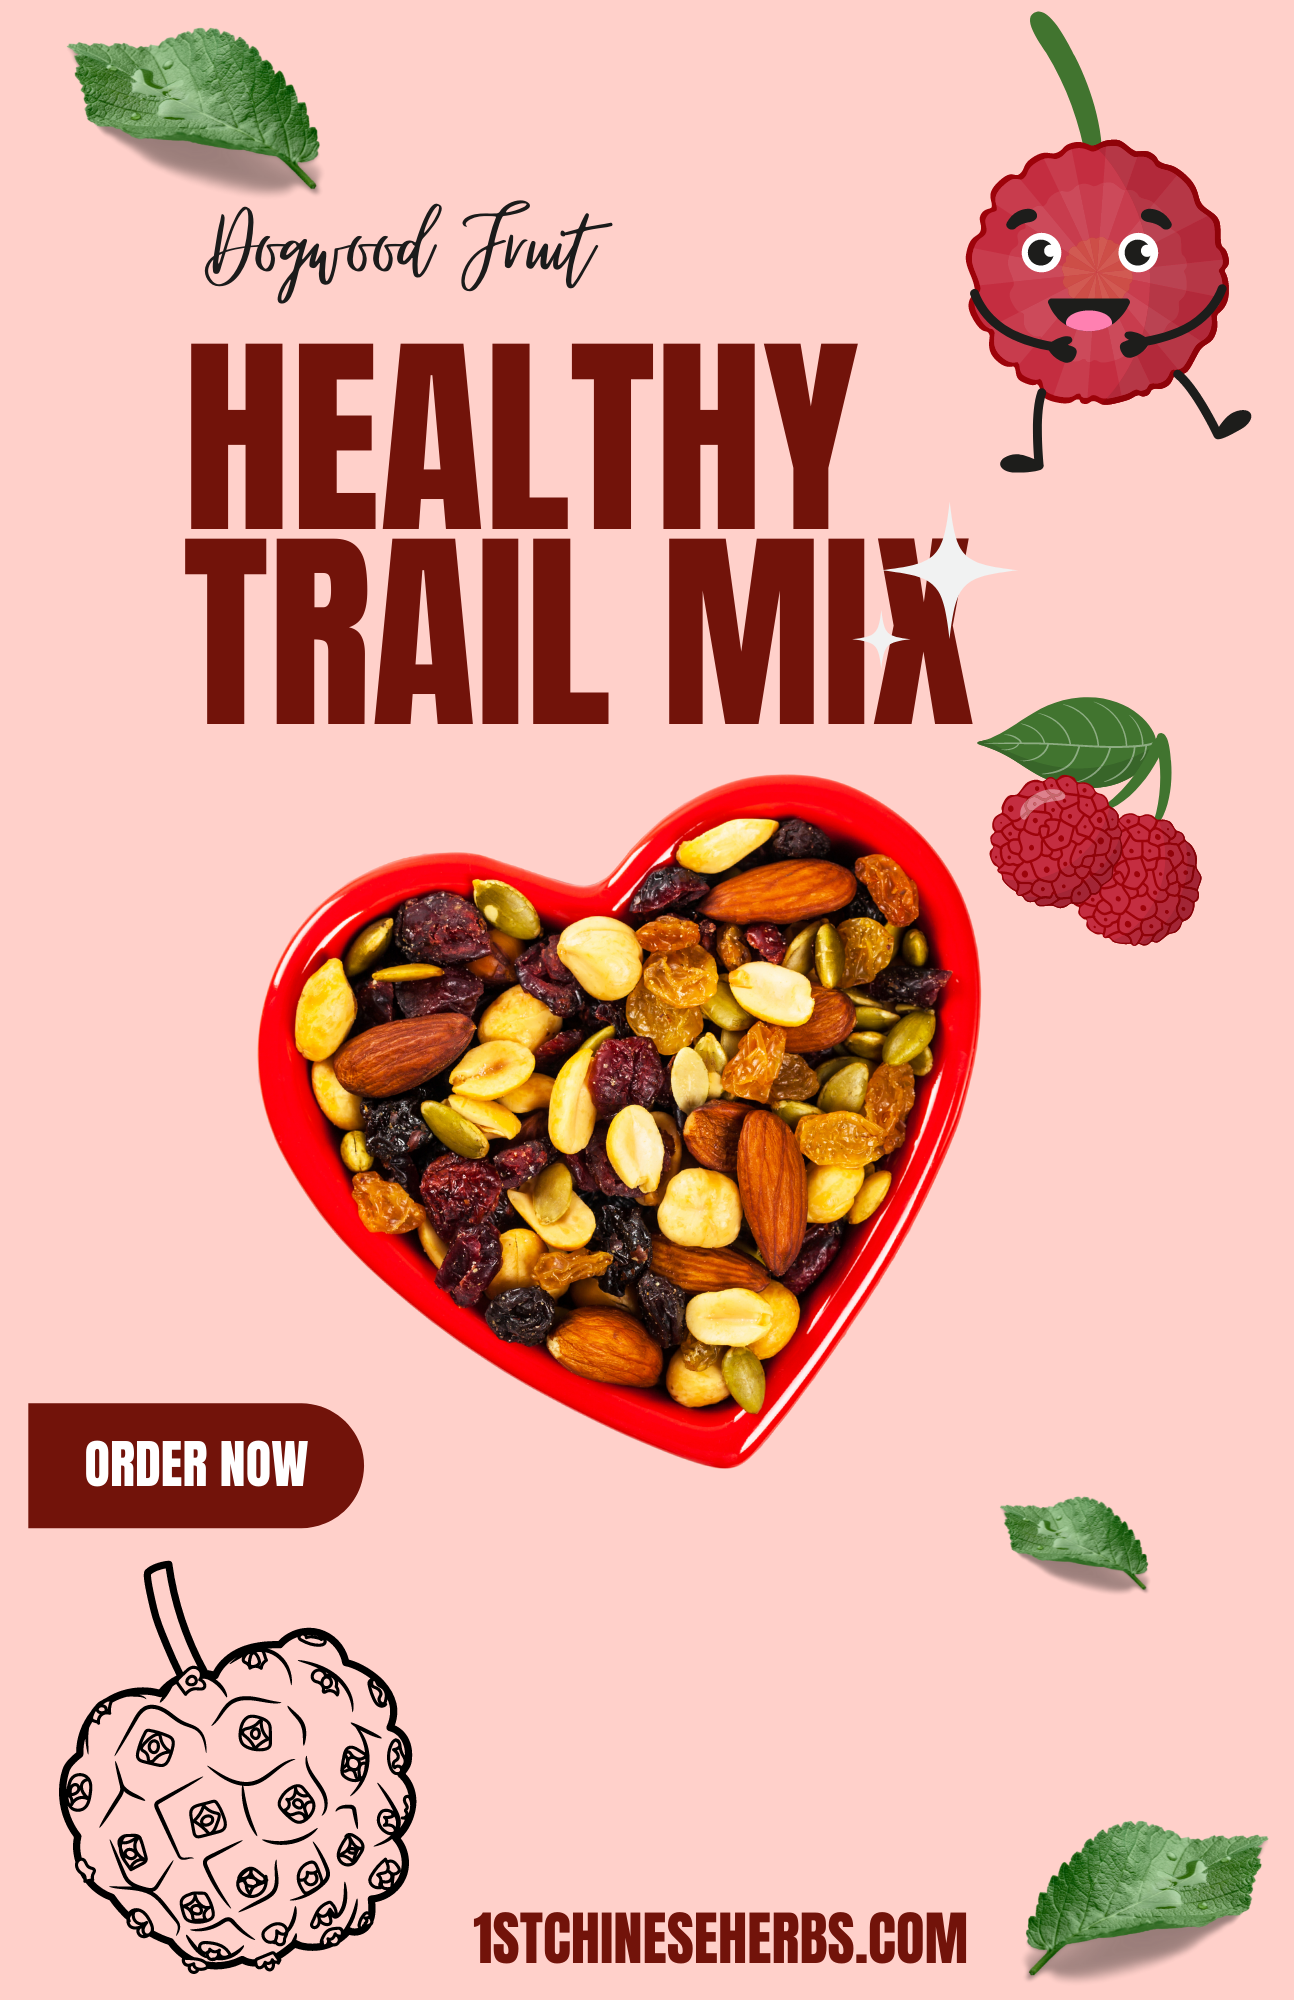 Enjoy a healthy snack with dogwood fruit added to your trail mix!